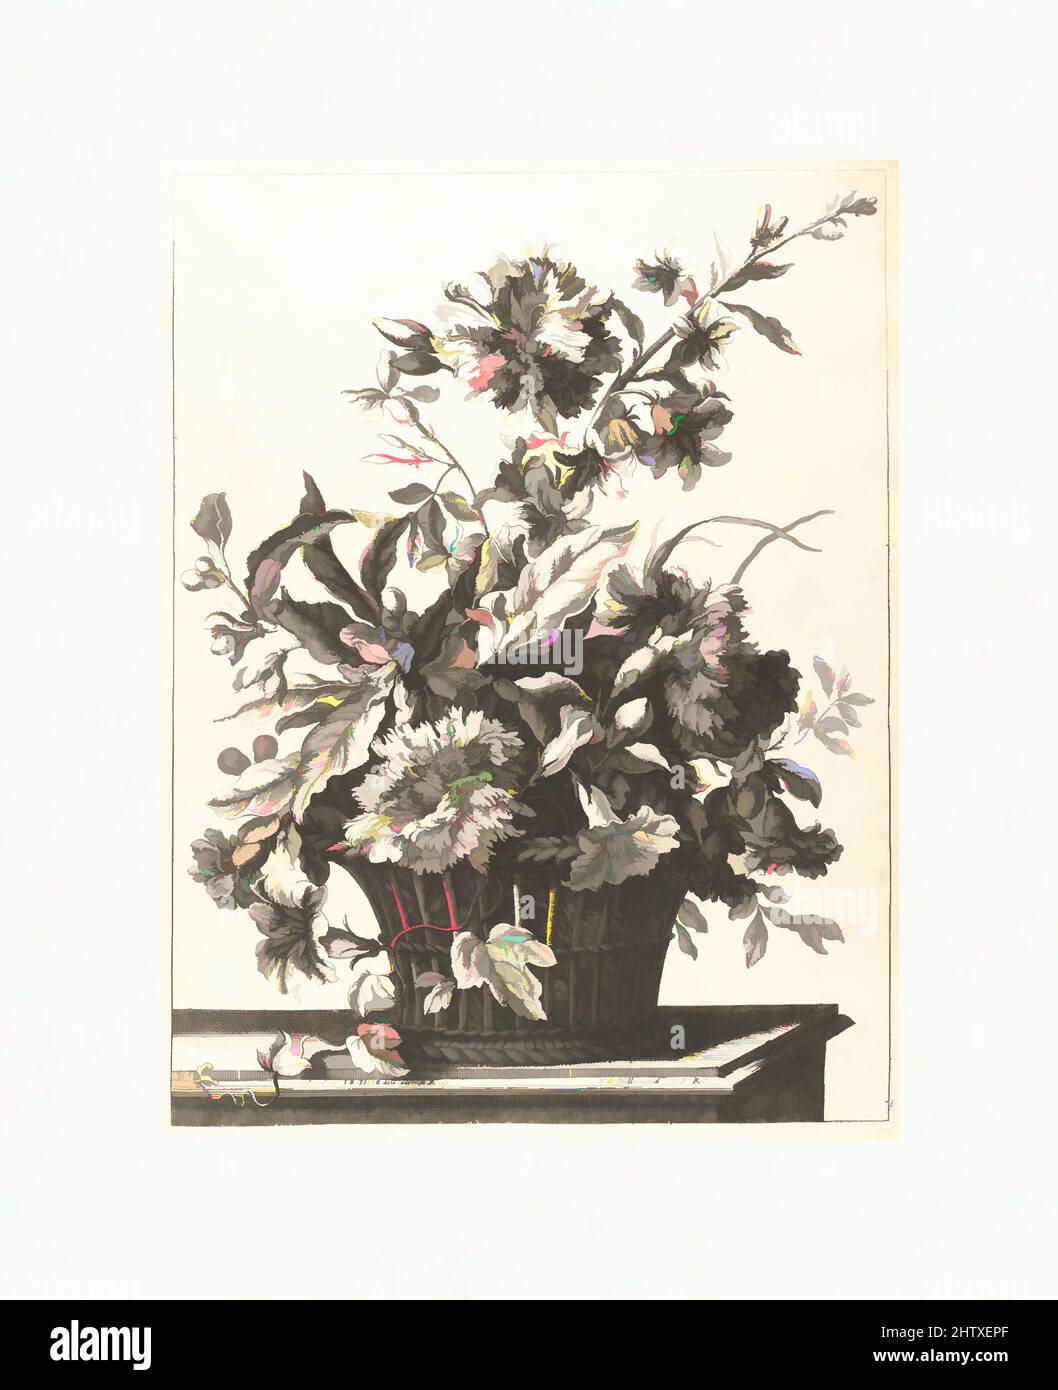 Art inspired by Upright Baskets of Flowers, before 1690, Engraving, Overall: 21 9/16 x 16 1/4 x 3/16 in. (54.8 x 41.3 x 0.5 cm), Books, Classic works modernized by Artotop with a splash of modernity. Shapes, color and value, eye-catching visual impact on art. Emotions through freedom of artworks in a contemporary way. A timeless message pursuing a wildly creative new direction. Artists turning to the digital medium and creating the Artotop NFT Stock Photo